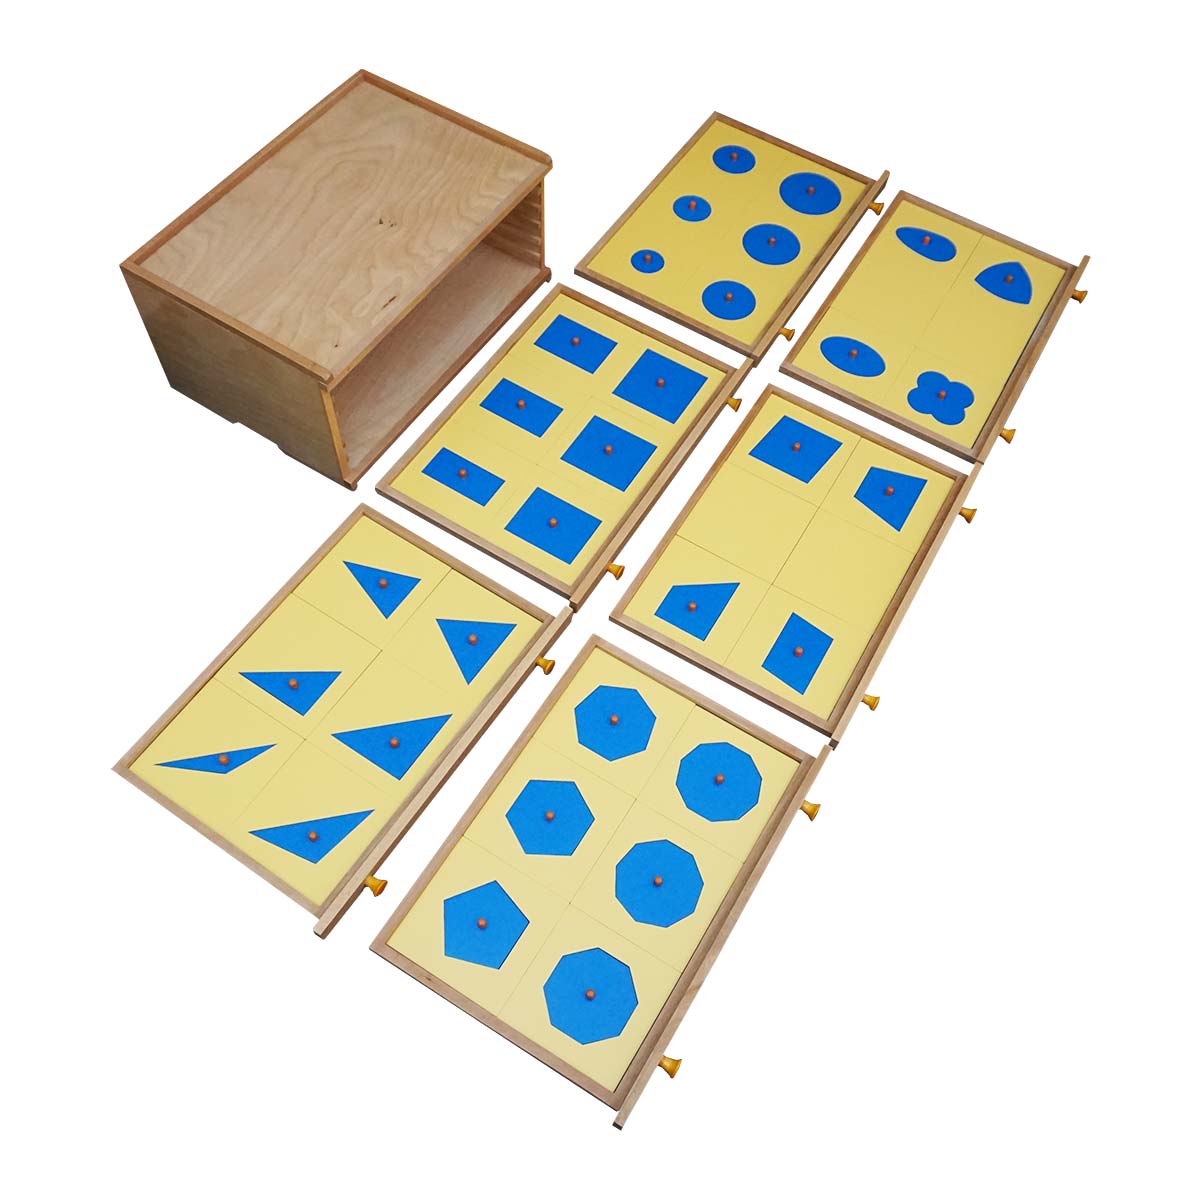 Geometrical Cabinet Montessori Materials Learning Toys And Furniture